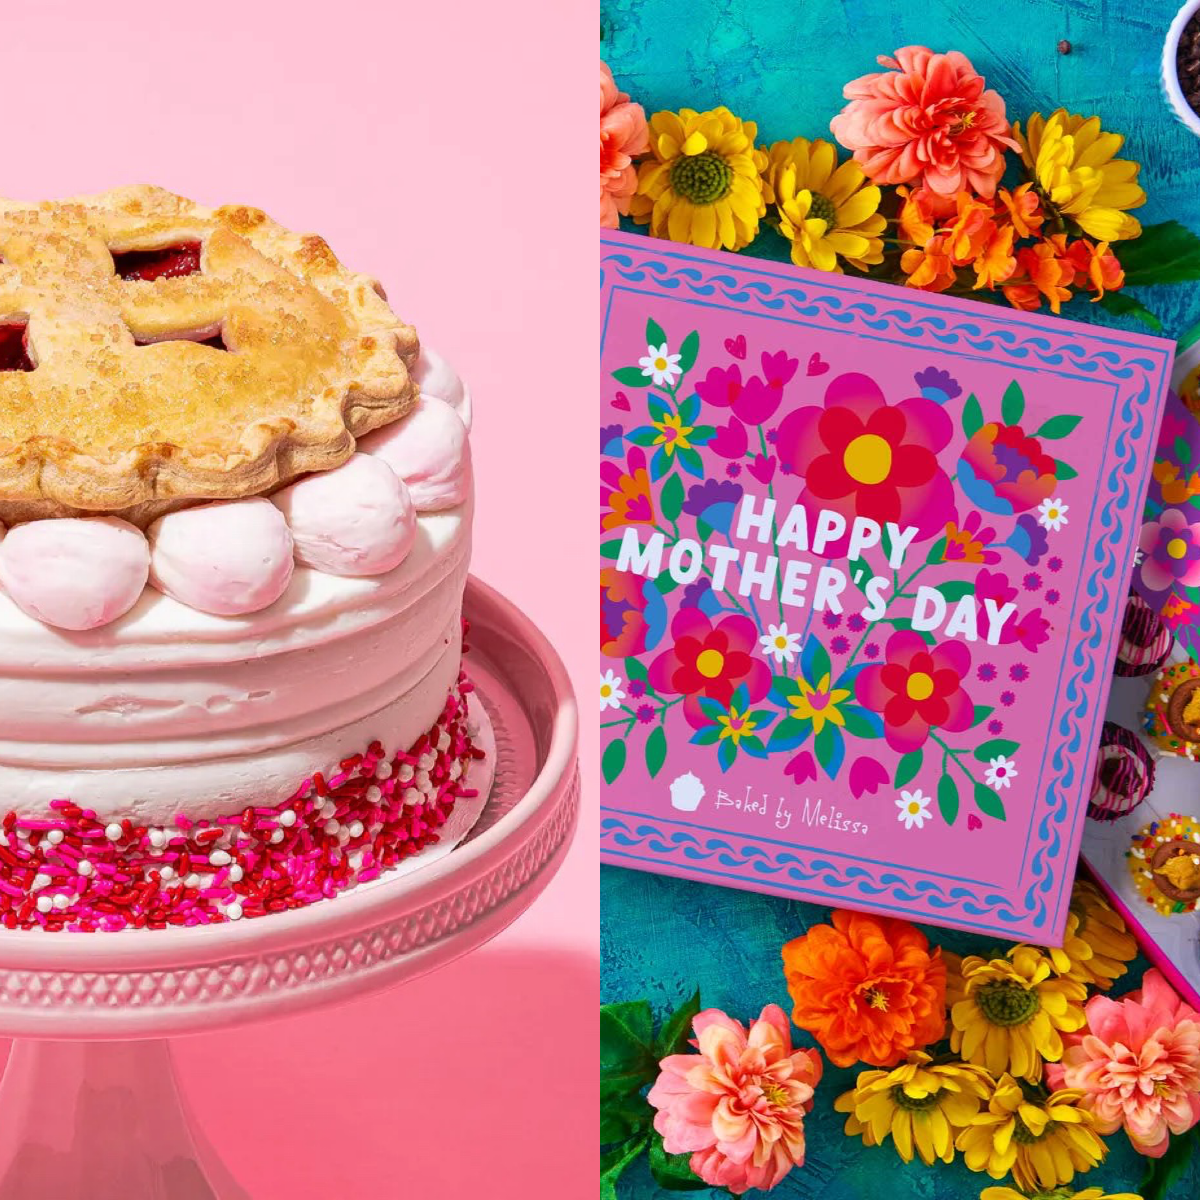 14 Sweet Treats to Send Mom for Mother’s Day